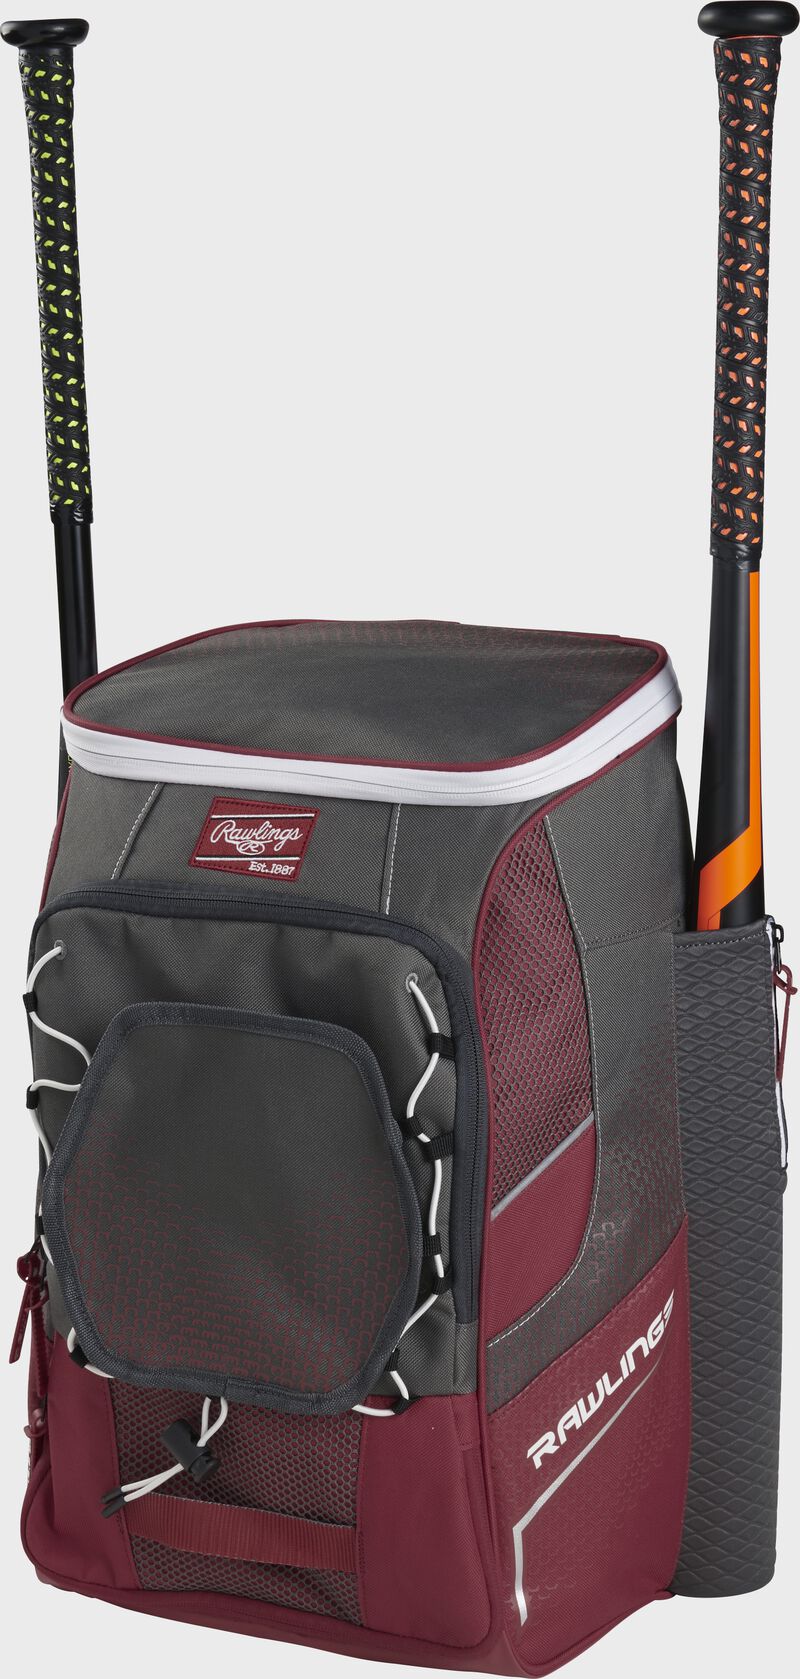 Front right angle view of a cardinal Impulse backpack with two bats in the side sleeves - SKU: IMPLSE-C